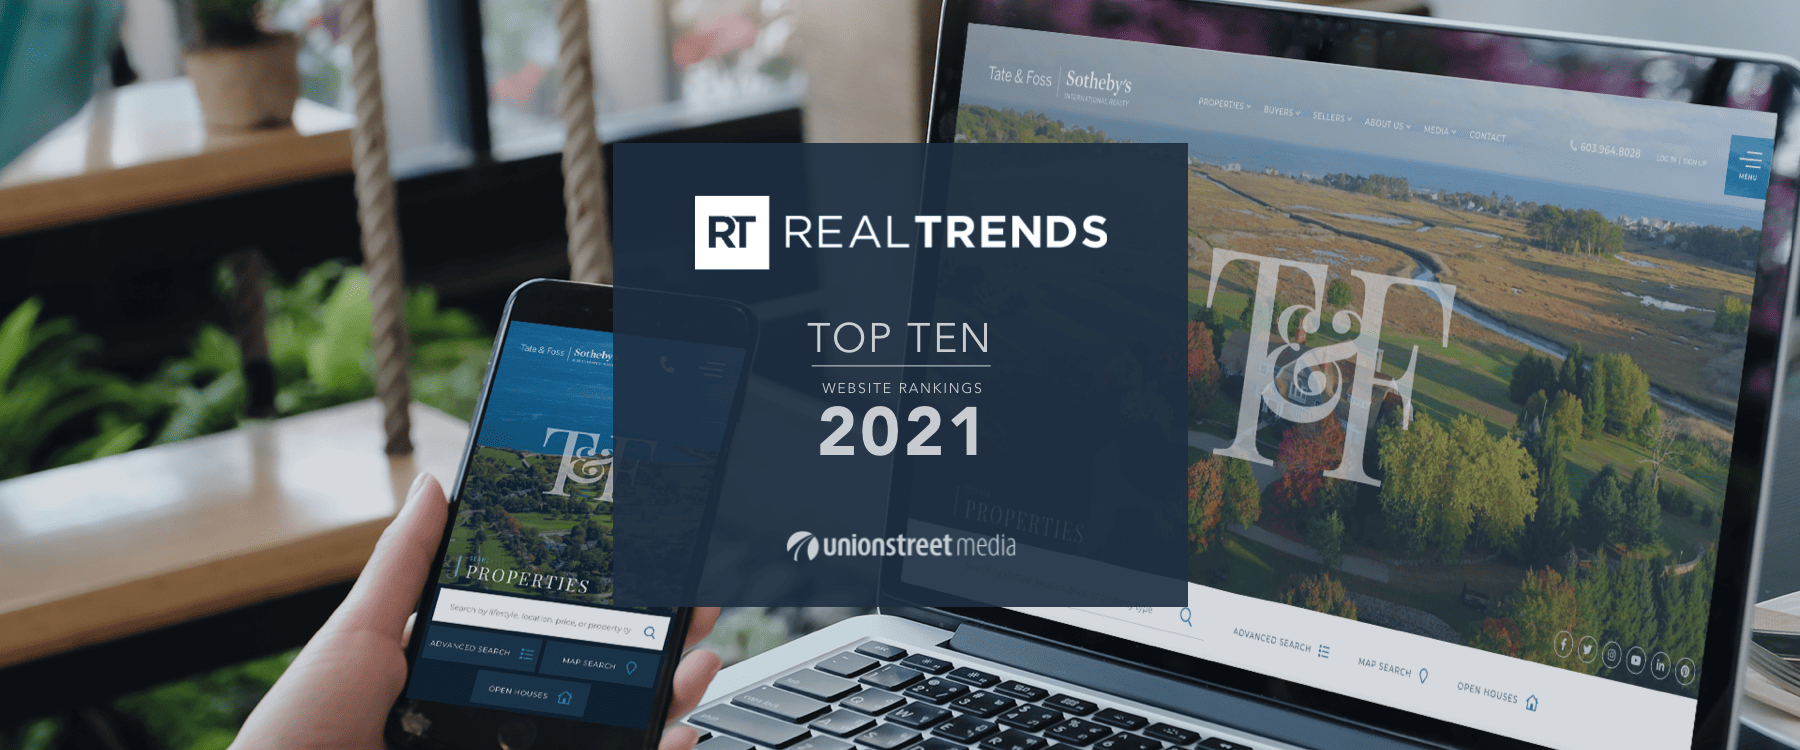 Union Street Media Wins the Most REAL Trends Website Rankings Awards, Again!